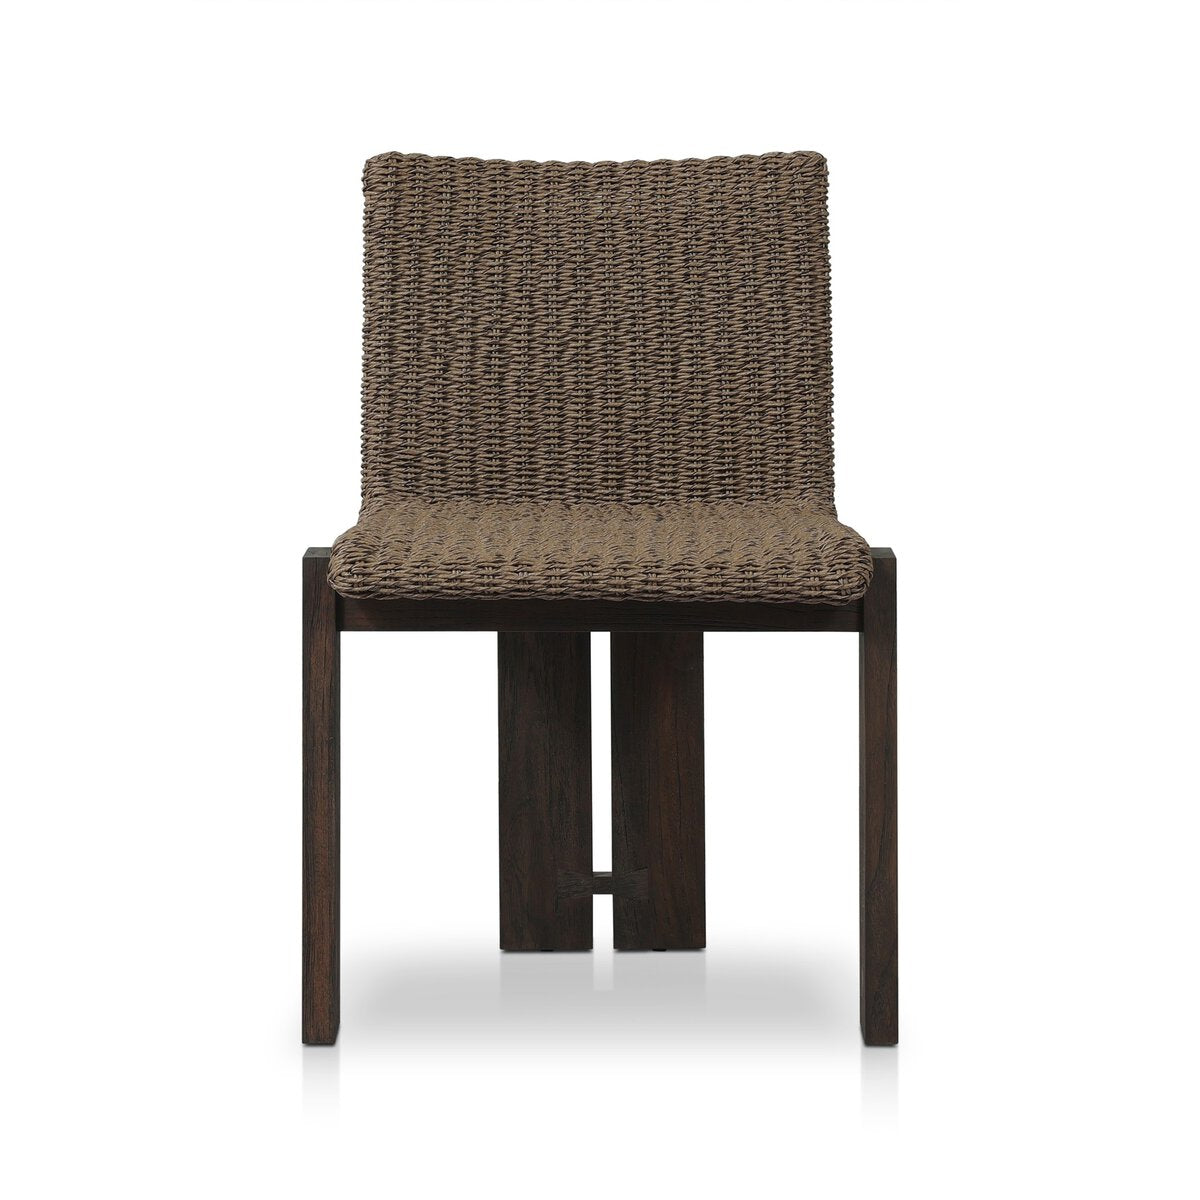 ROXY OUTDOOR DINING CHAIR